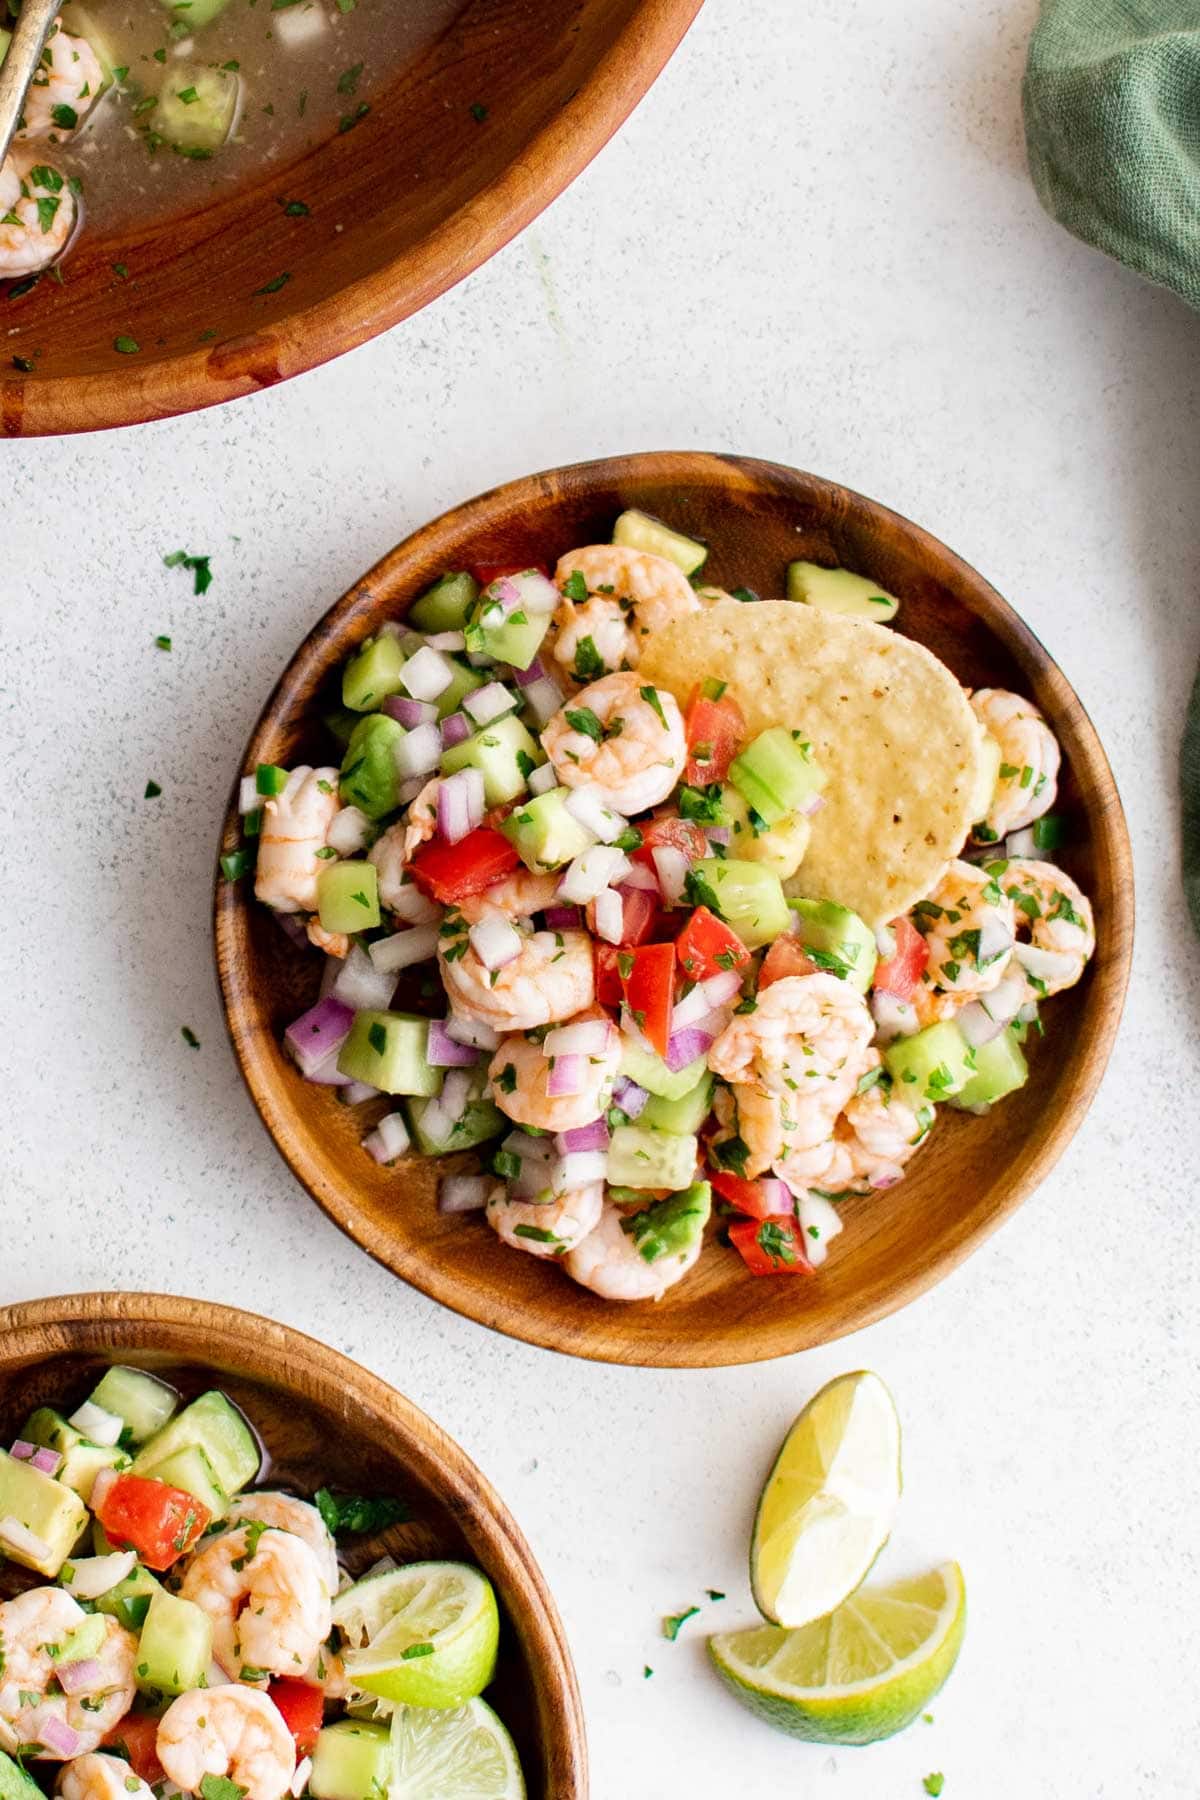 Shrimp Ceviche on plates with tortilla chips.